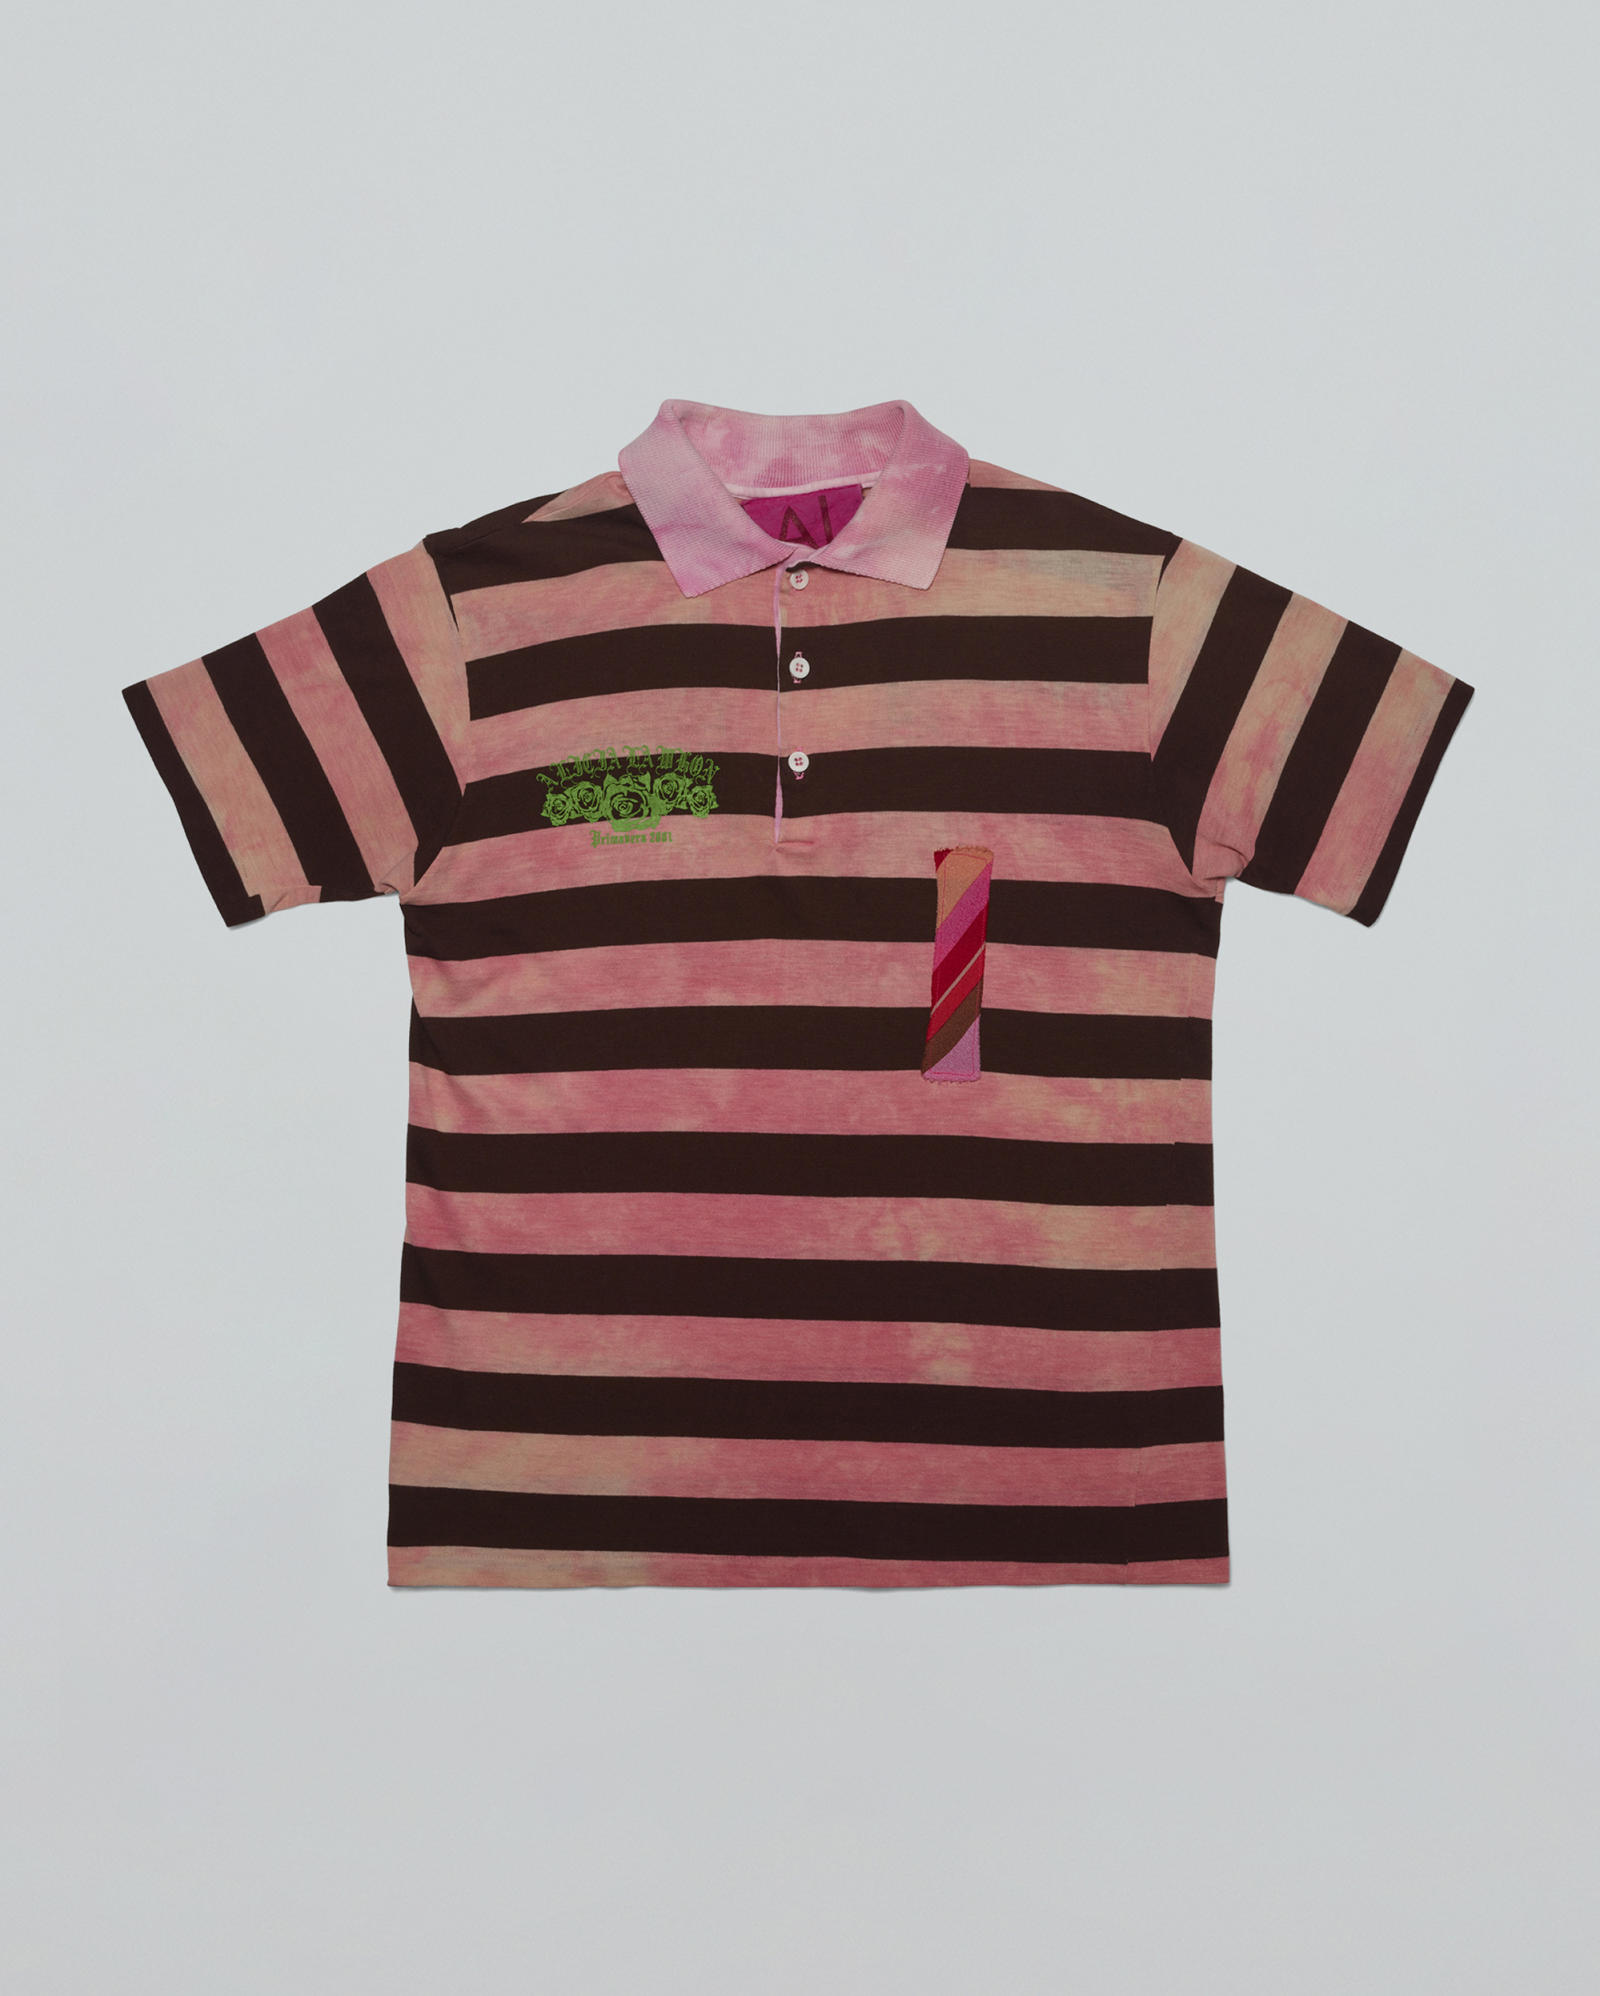 Striped-Polo-Shirt-The-Lapdance-Music-Video-1